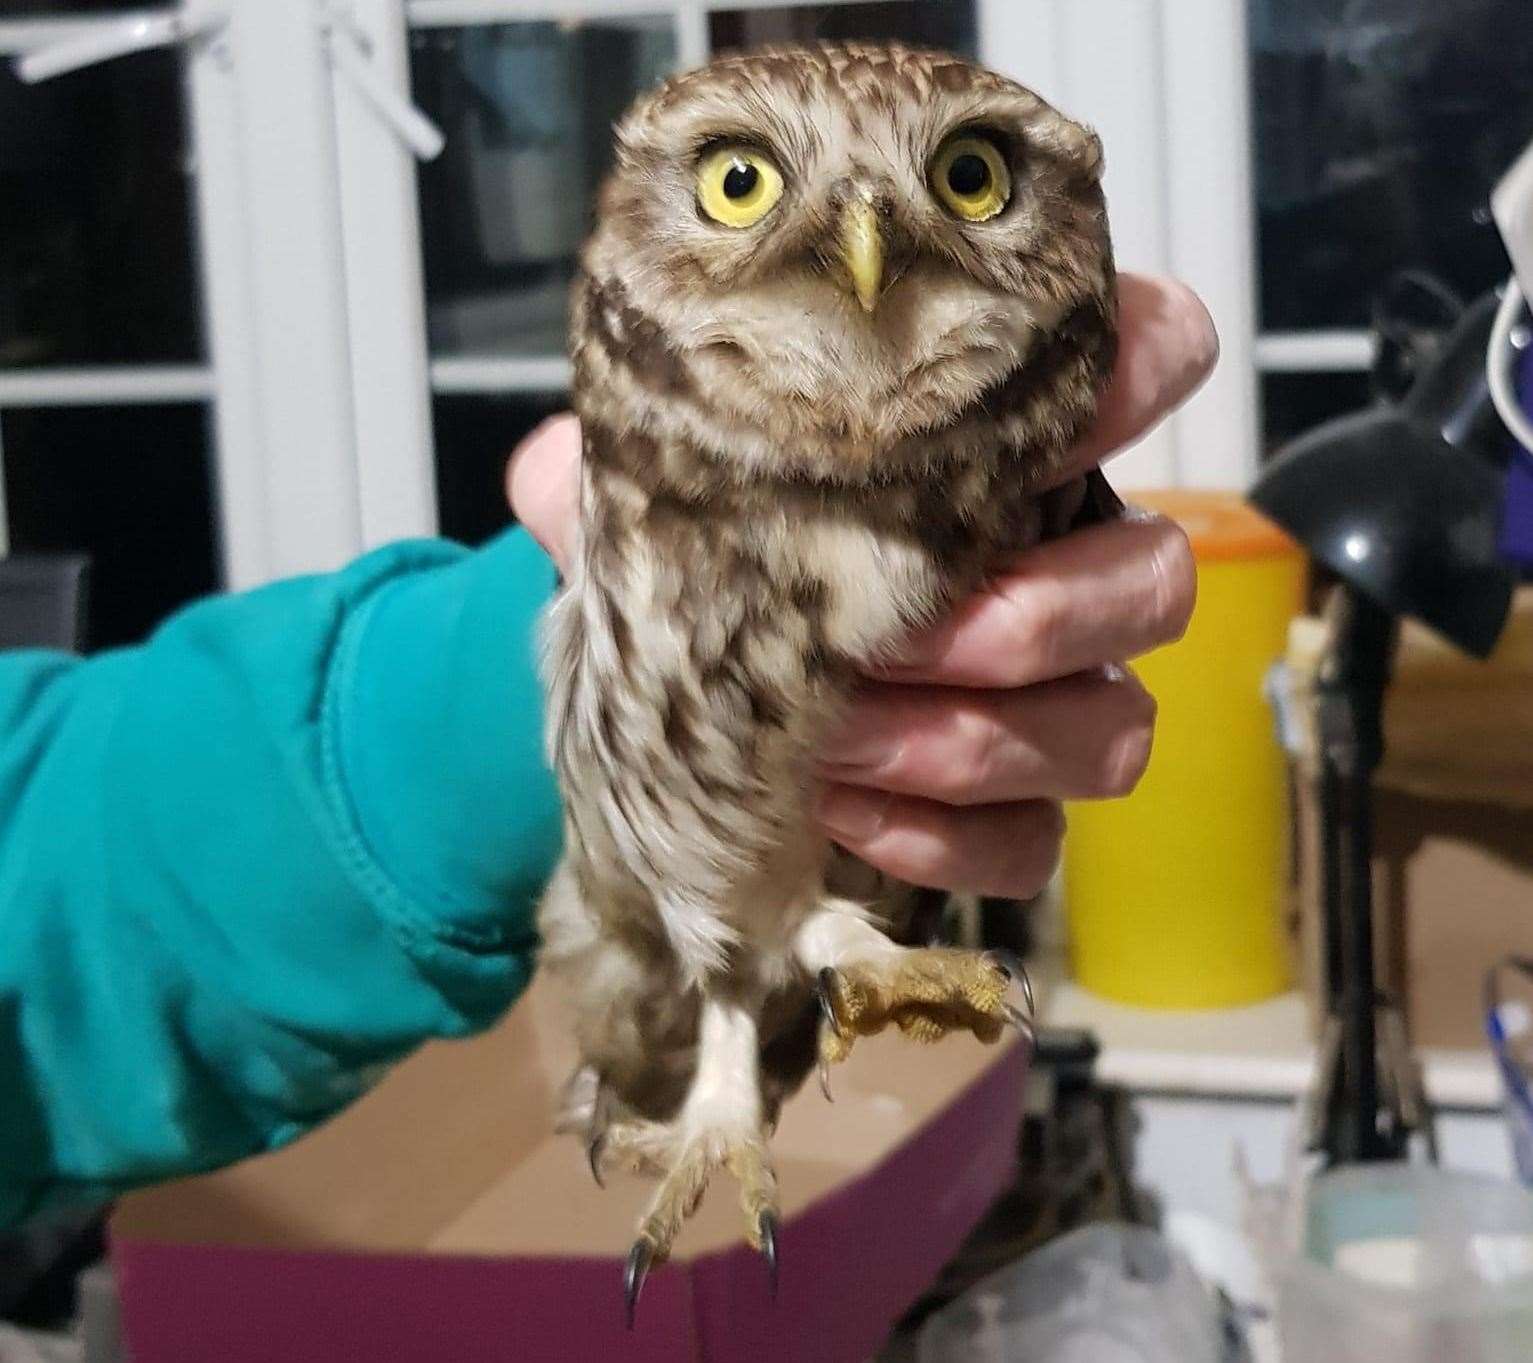 Kent Wildlife Rescue saved a Little Owl who had fallen into a lit fire in Upchurch, Sittingbourne